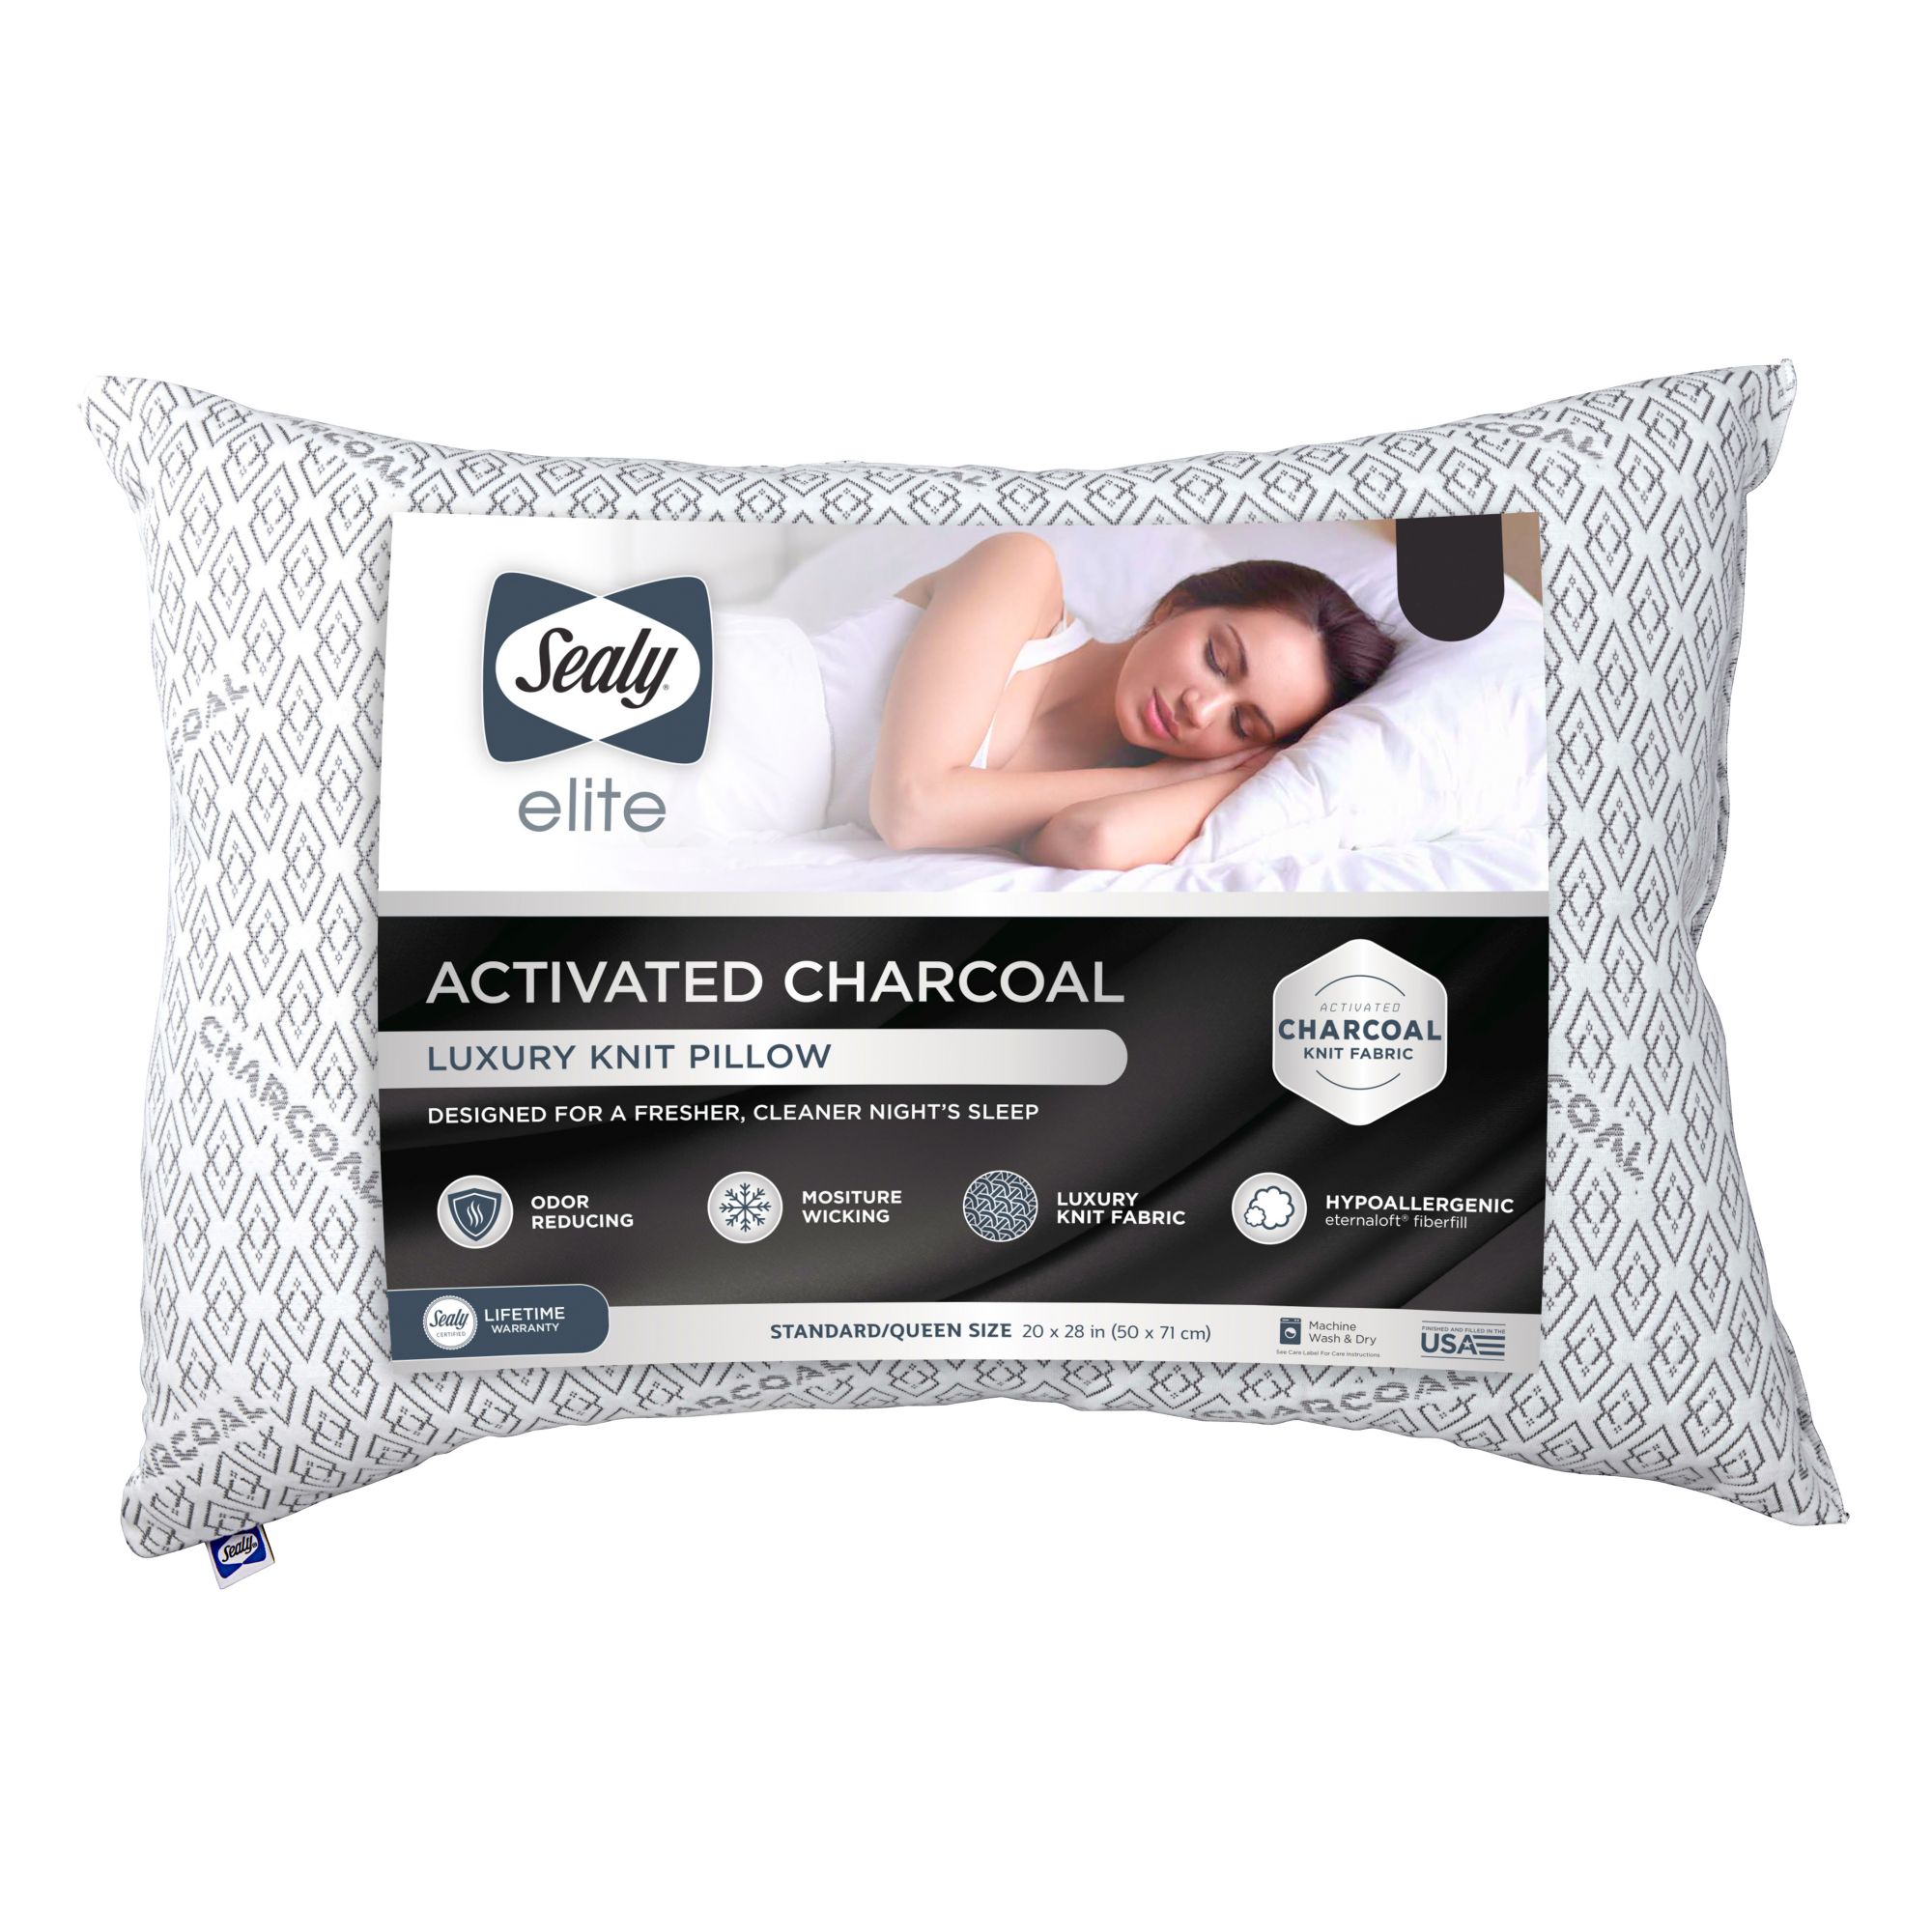 Sealy Standard/Queen Size Charcoal Pillow - White